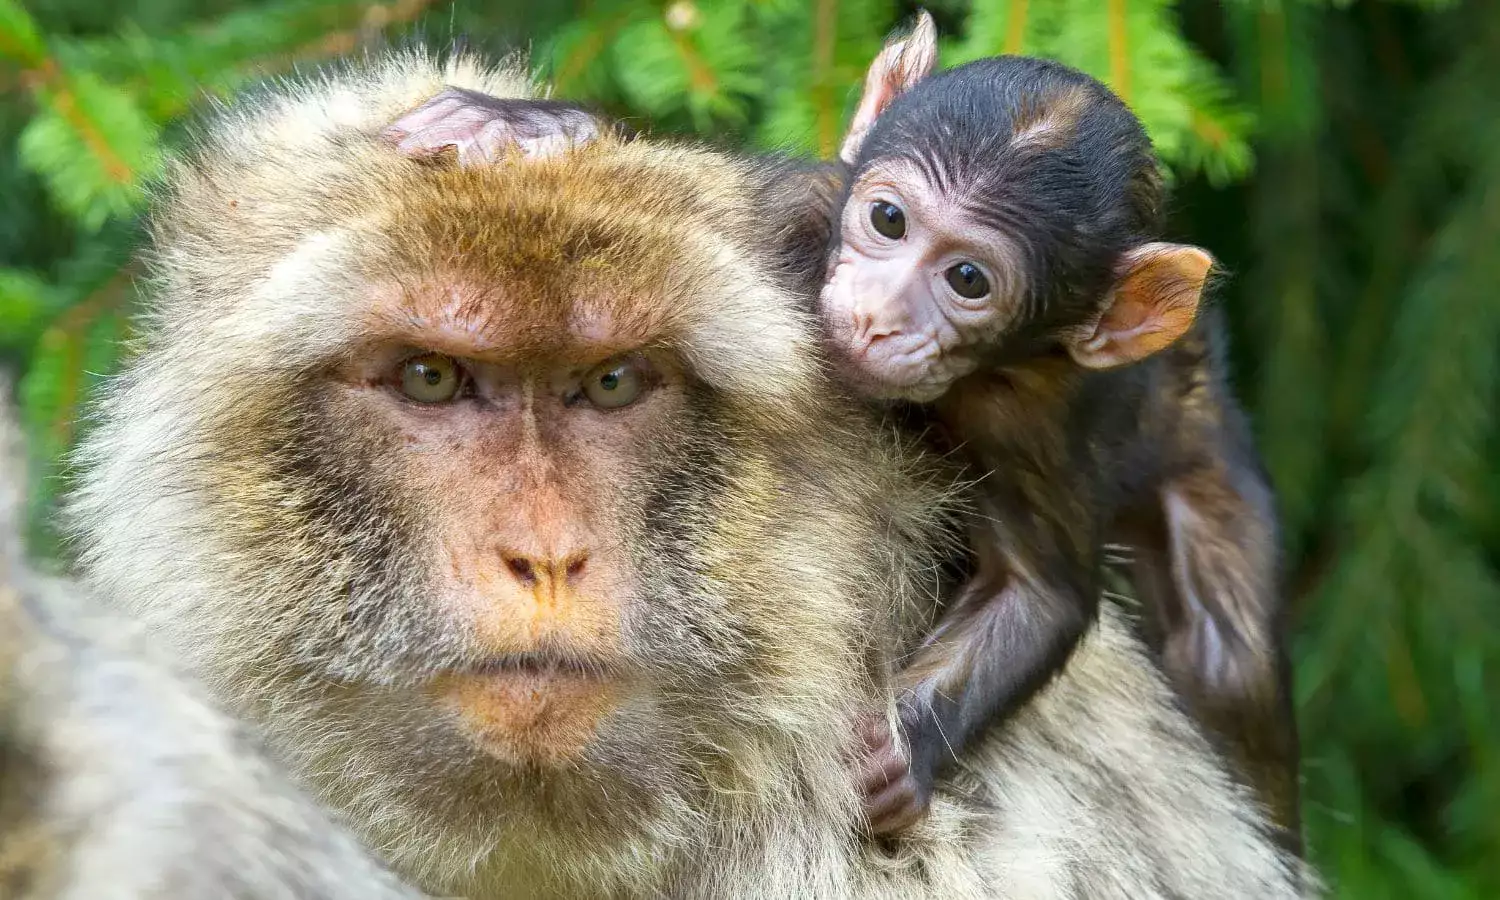 A baby Barbary Macaque riding its parent.